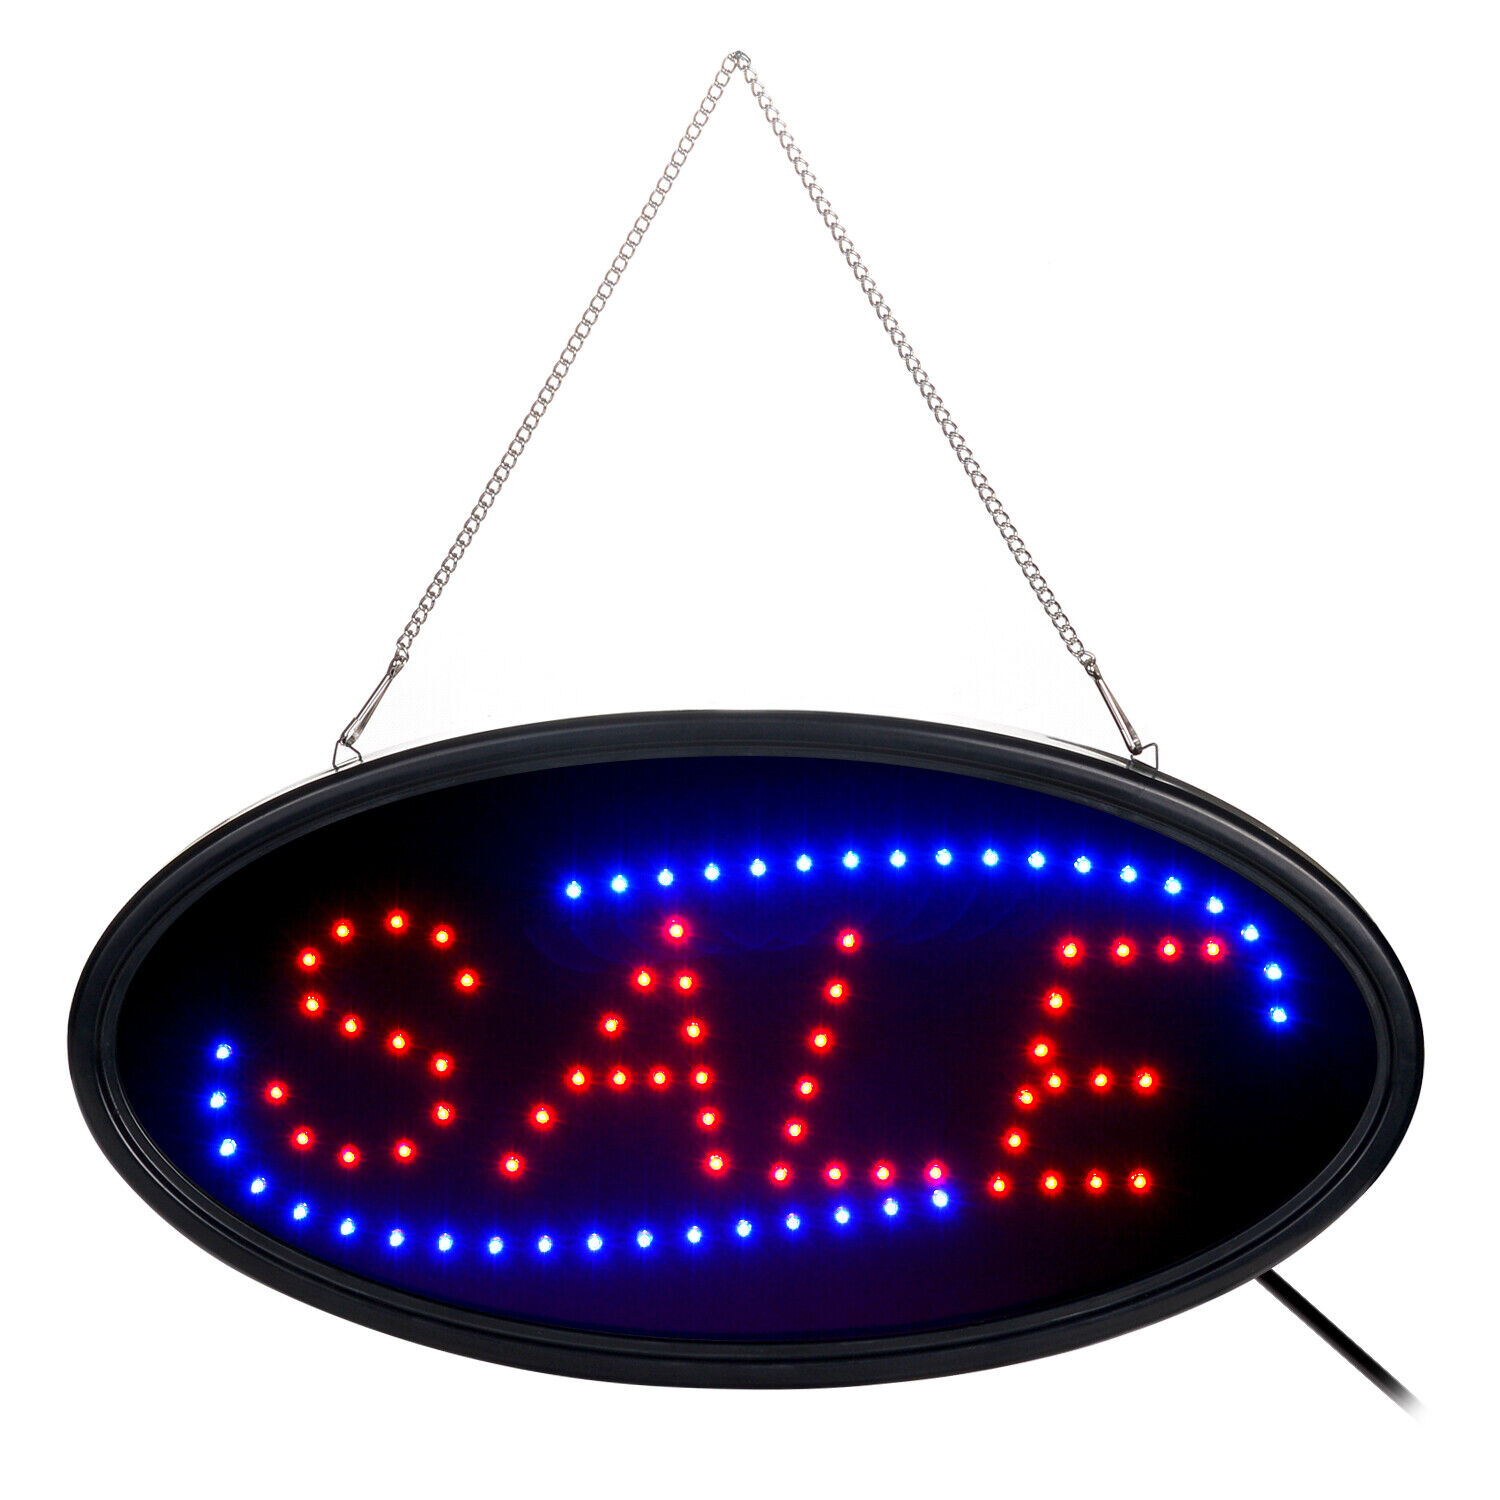 SALE Sign LED Neon Bar Board Hanging Electric Light Flashing Business Store Lamp